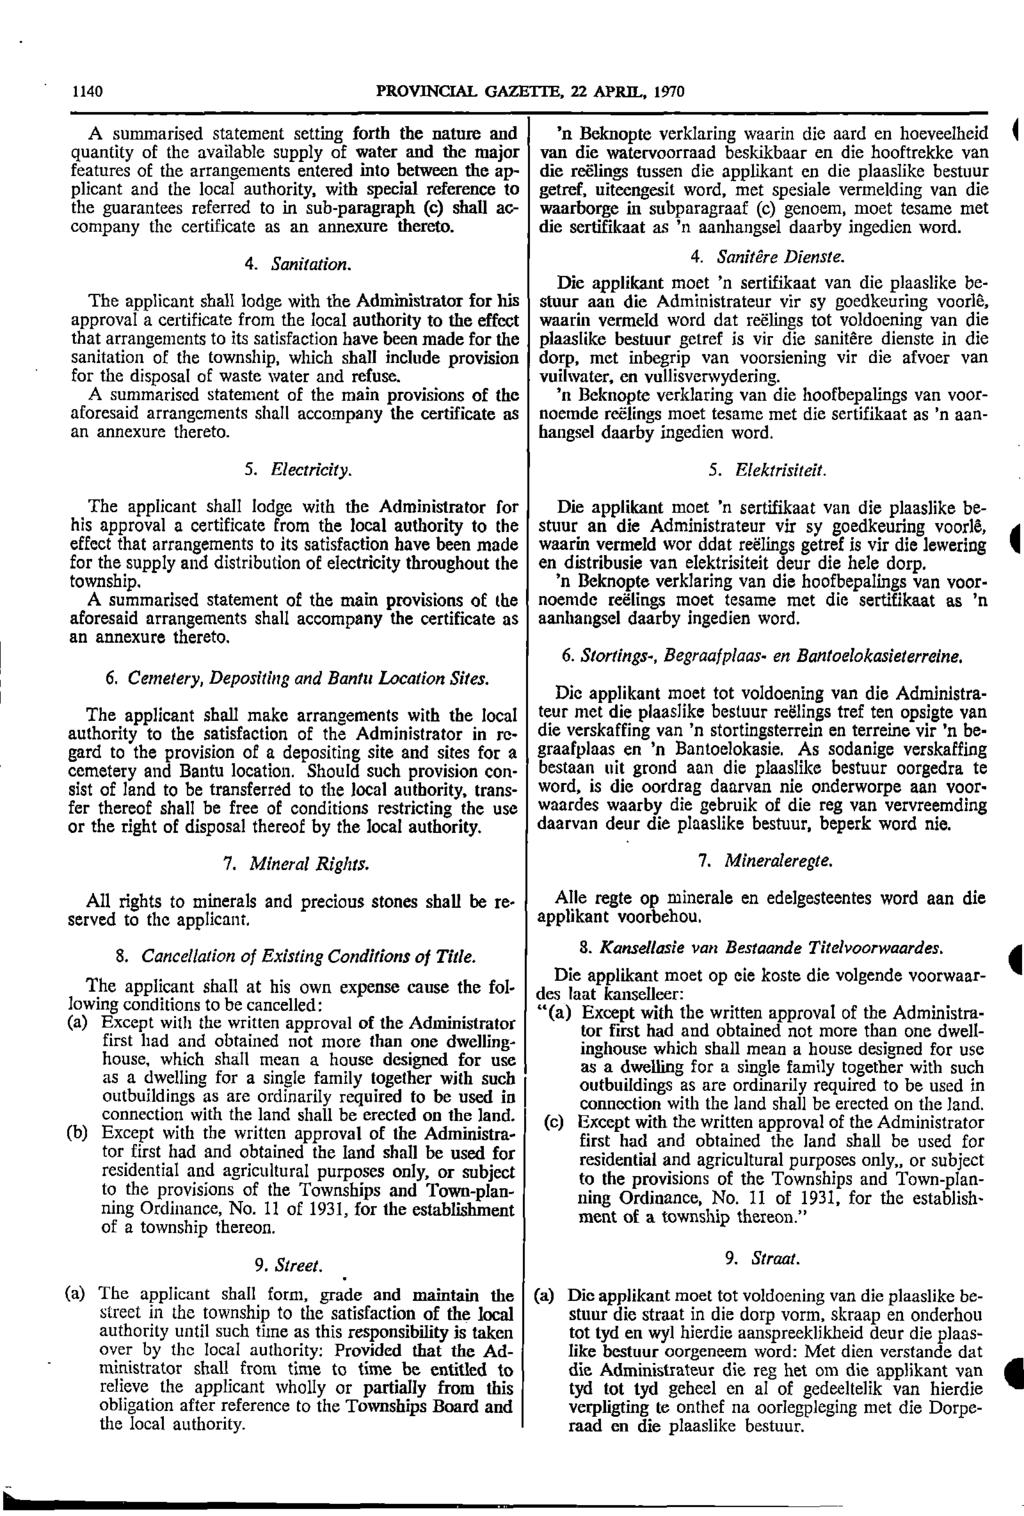 1140 PROVINCIAL GAZETTE 22 APRIL 1970 A summarised statement setting forth the nature and n Beknopte verklaring waarin die aard en hoeveelheid I quantity of the available supply of water and the